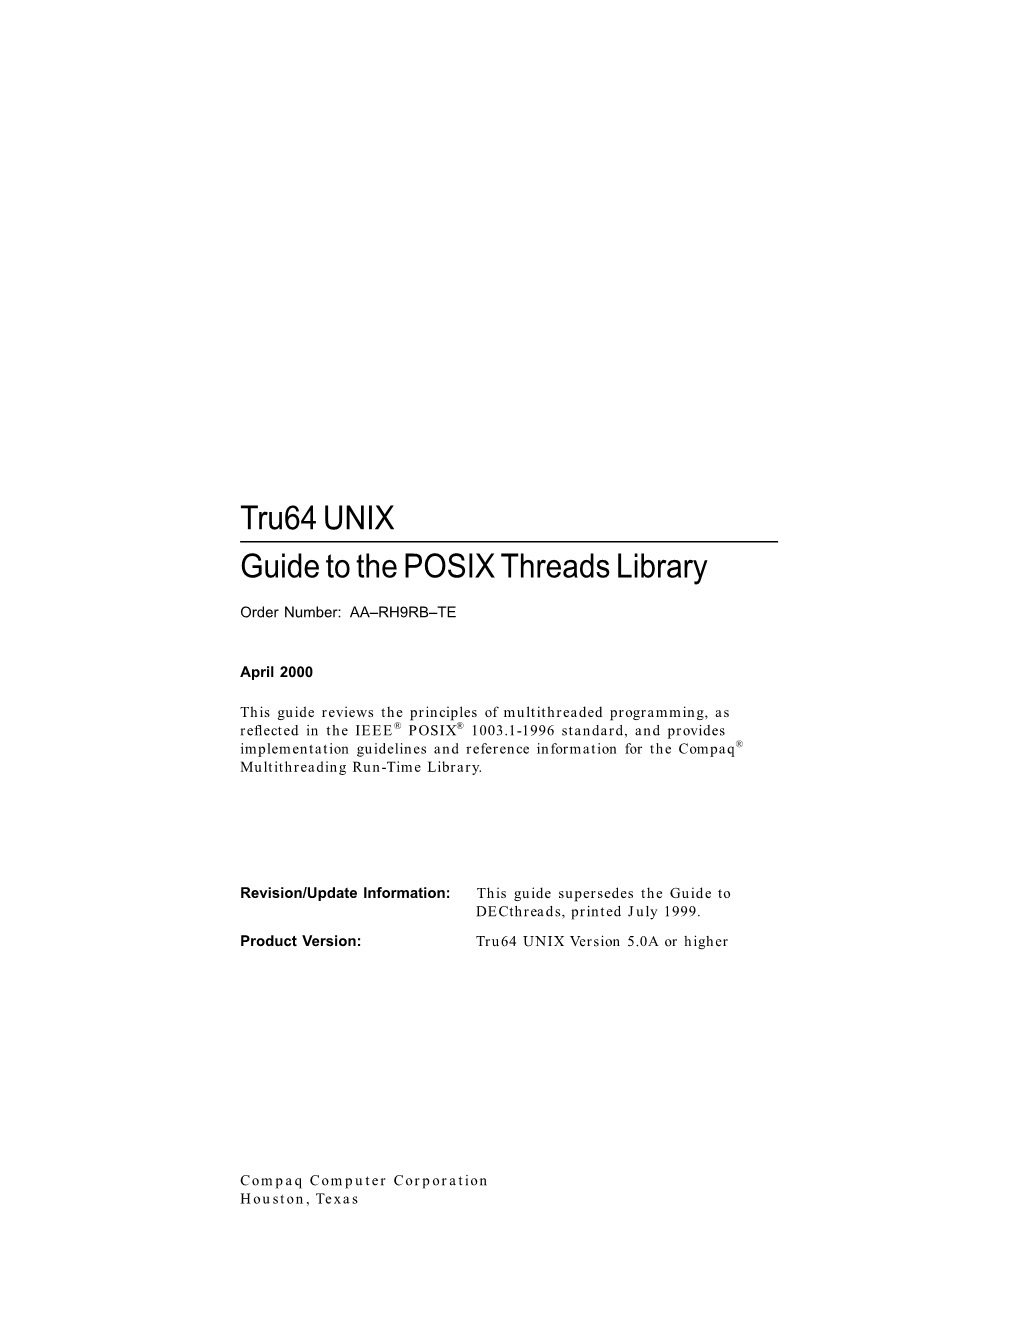 Tru64 UNIX Guide to the POSIX Threads Library